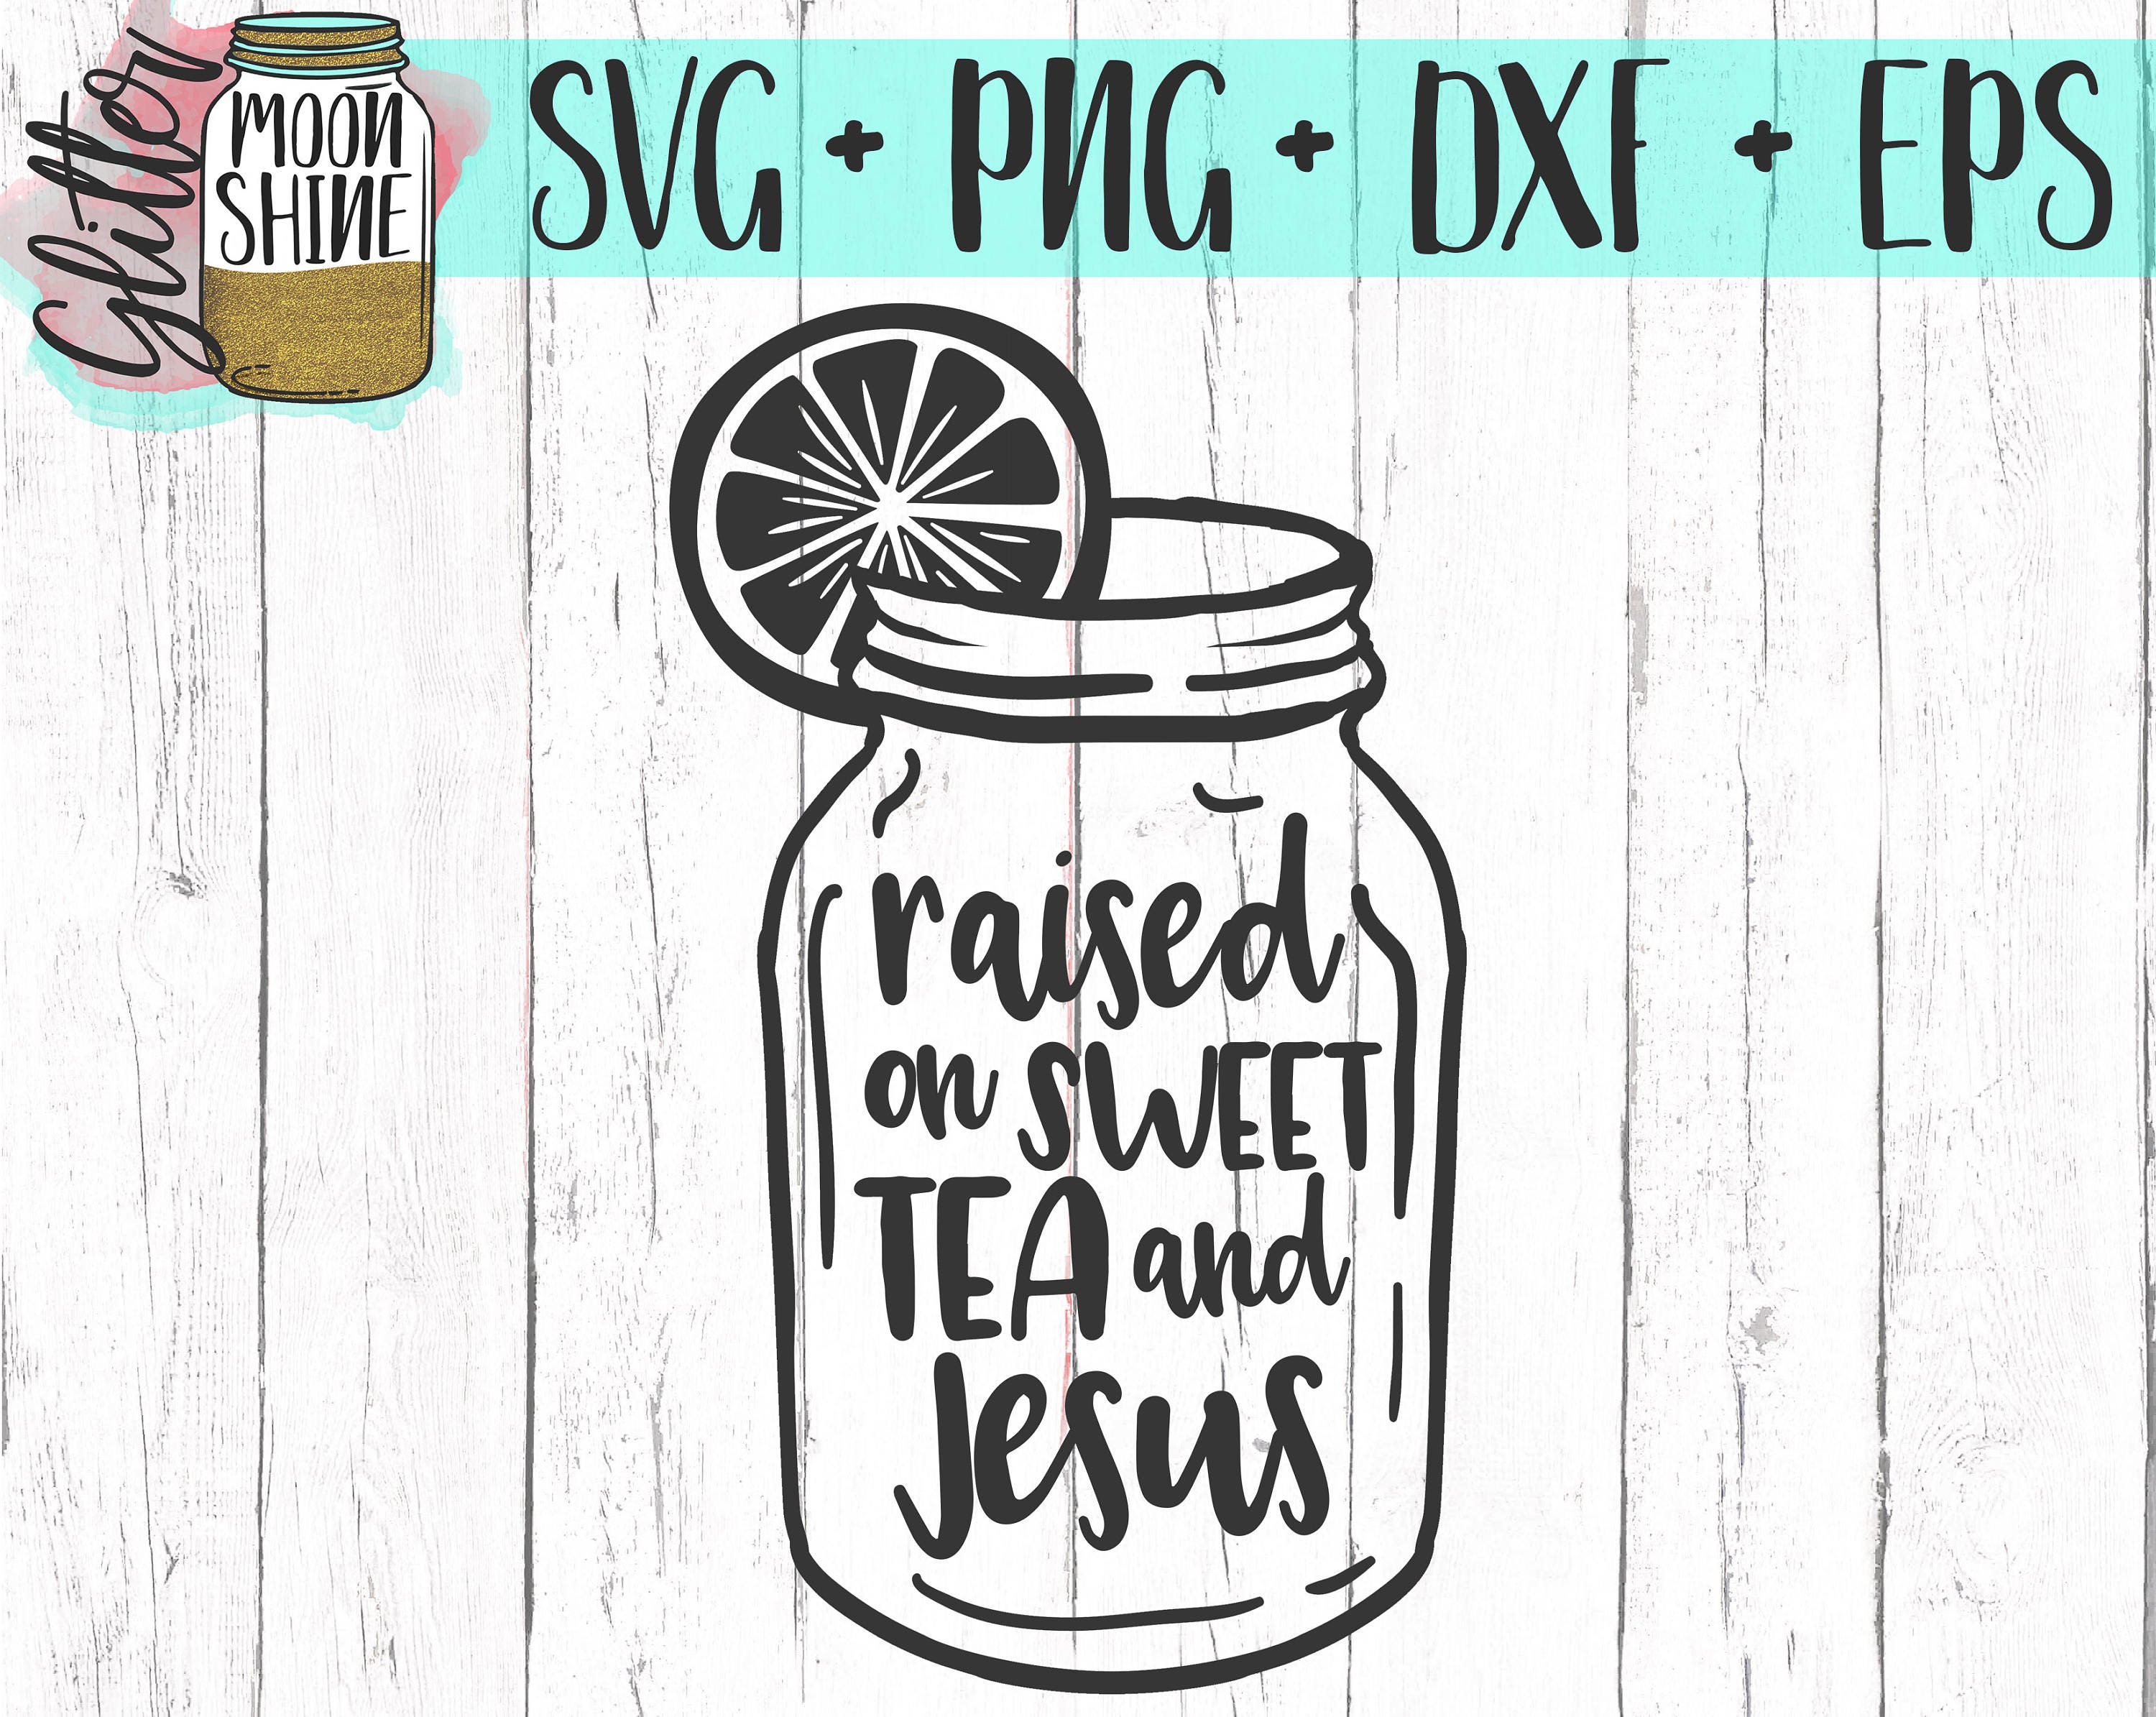 Download Raised On Sweet Tea and Jesus svg eps dxf png Files for